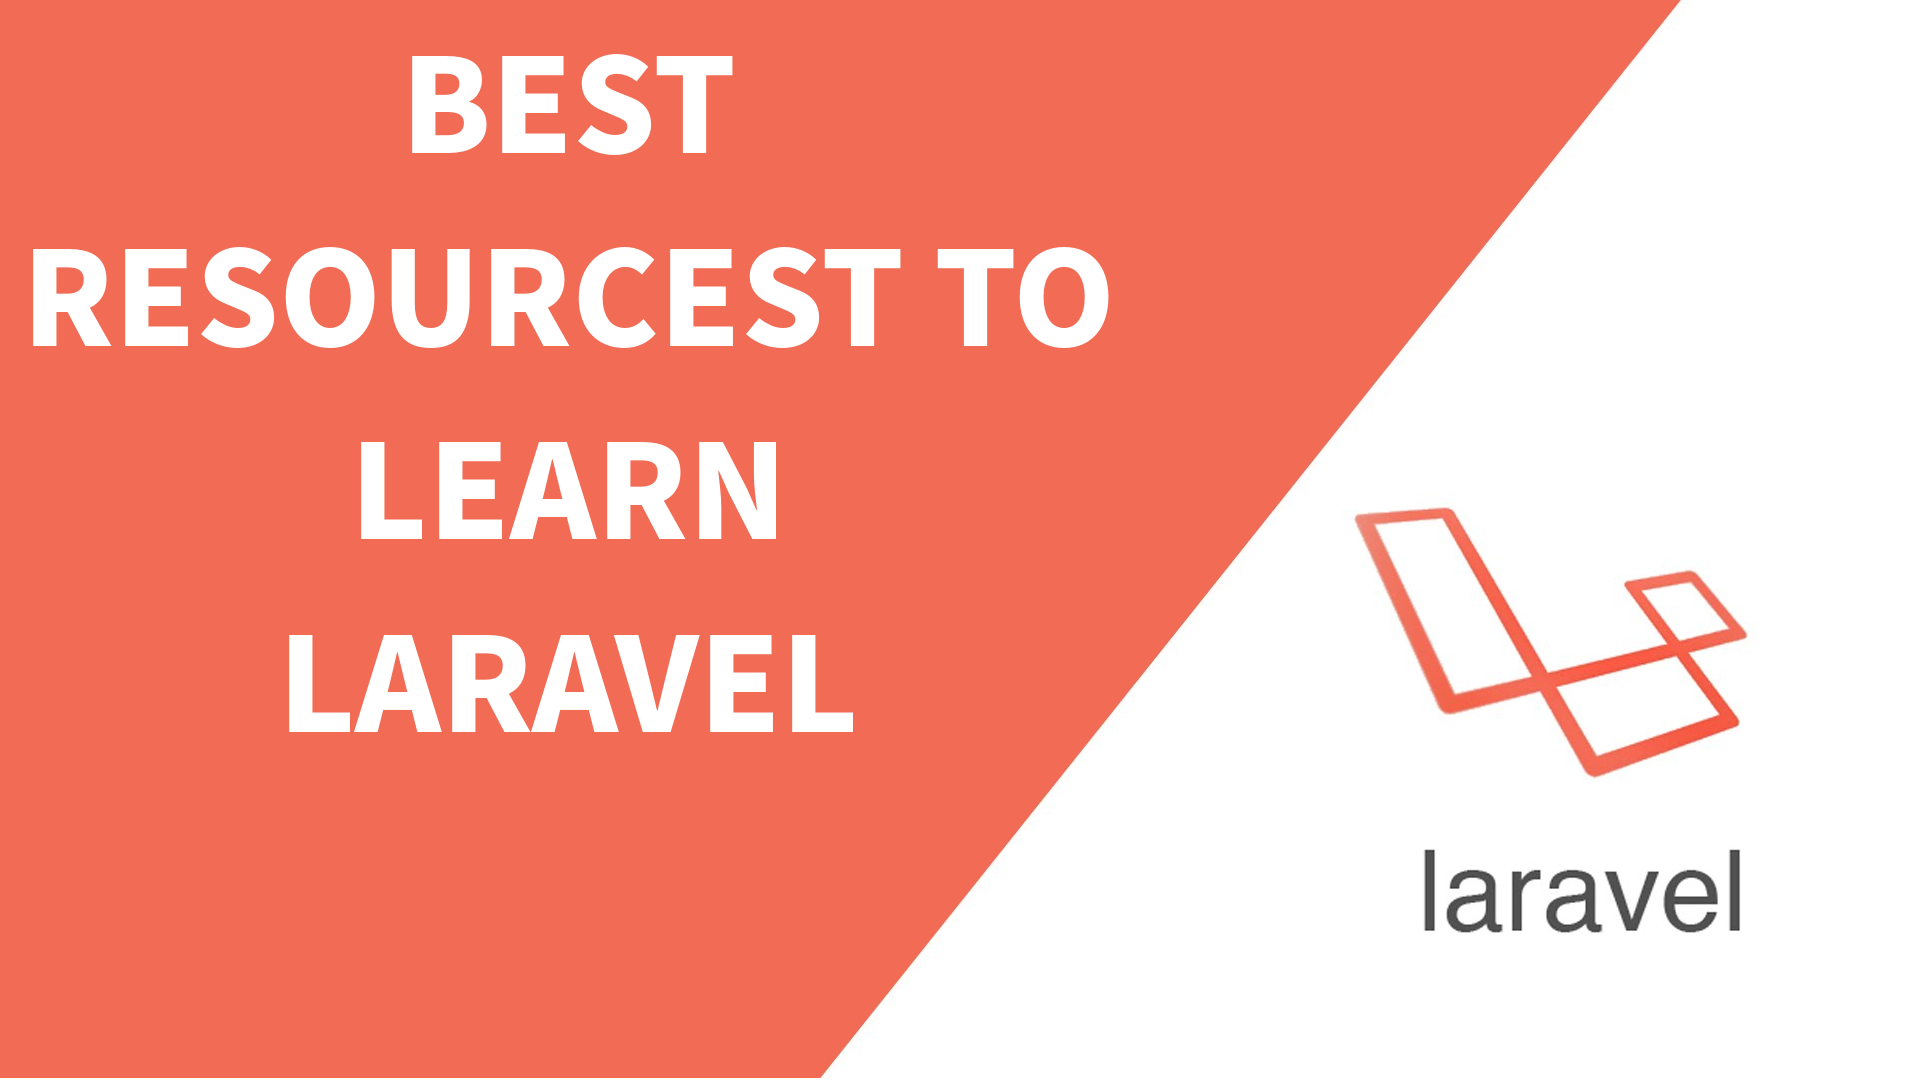 Best Resources to Learn Laravel